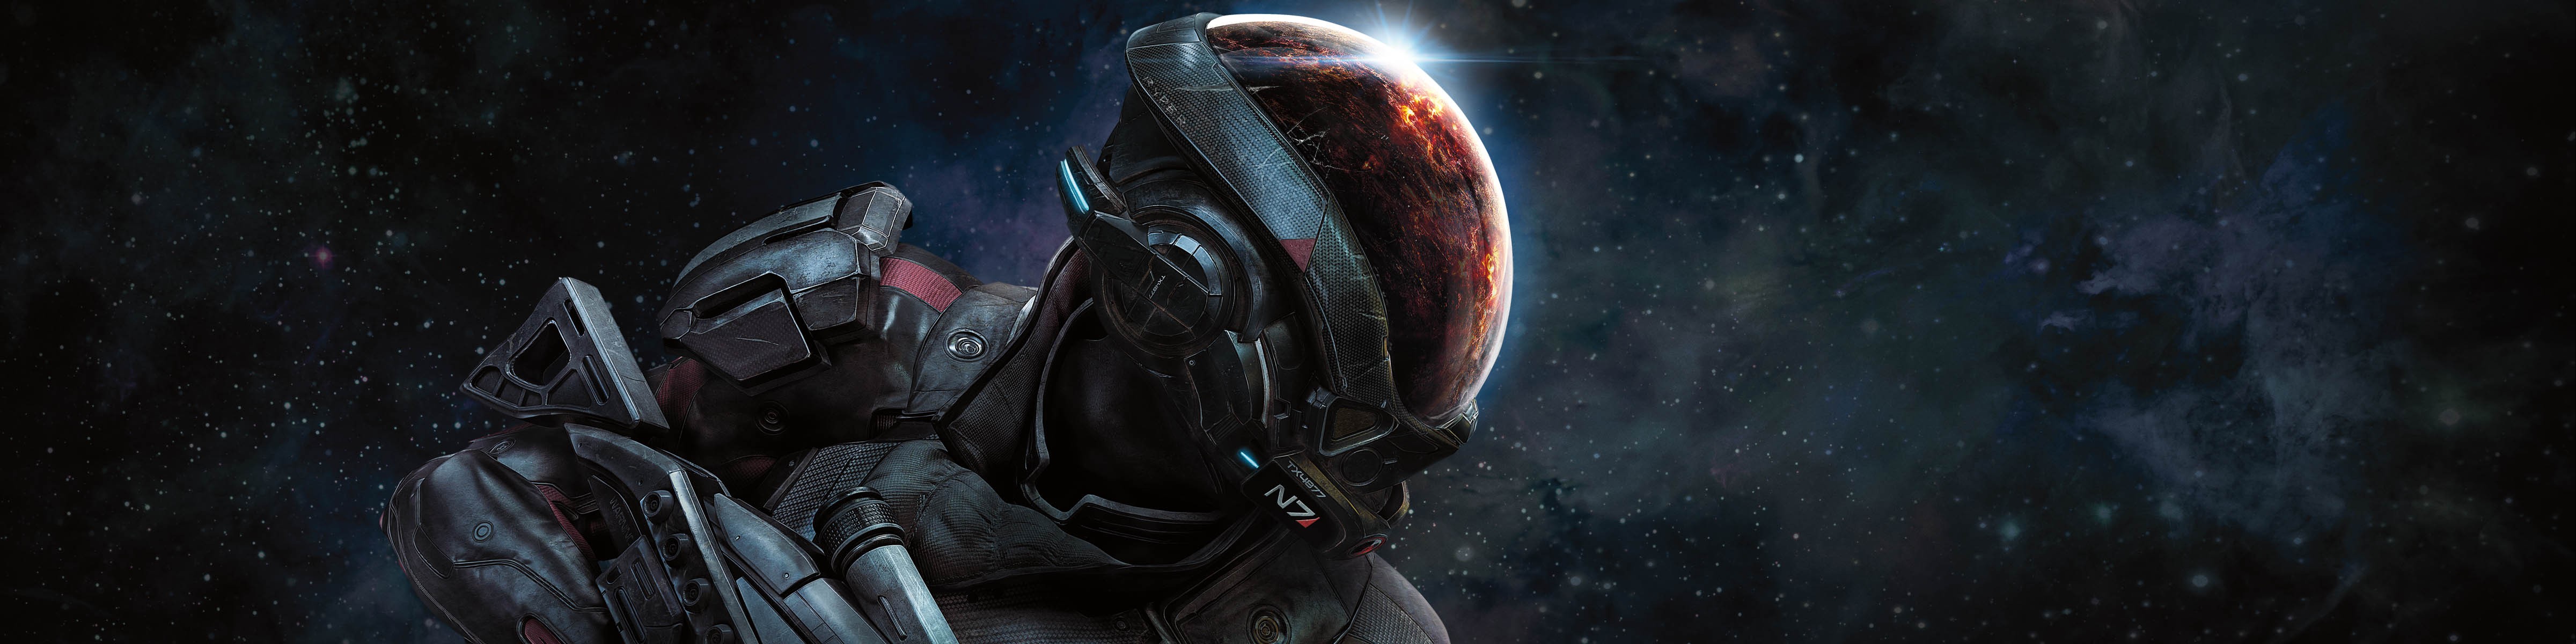 Mass Effect™: Andromeda cover image